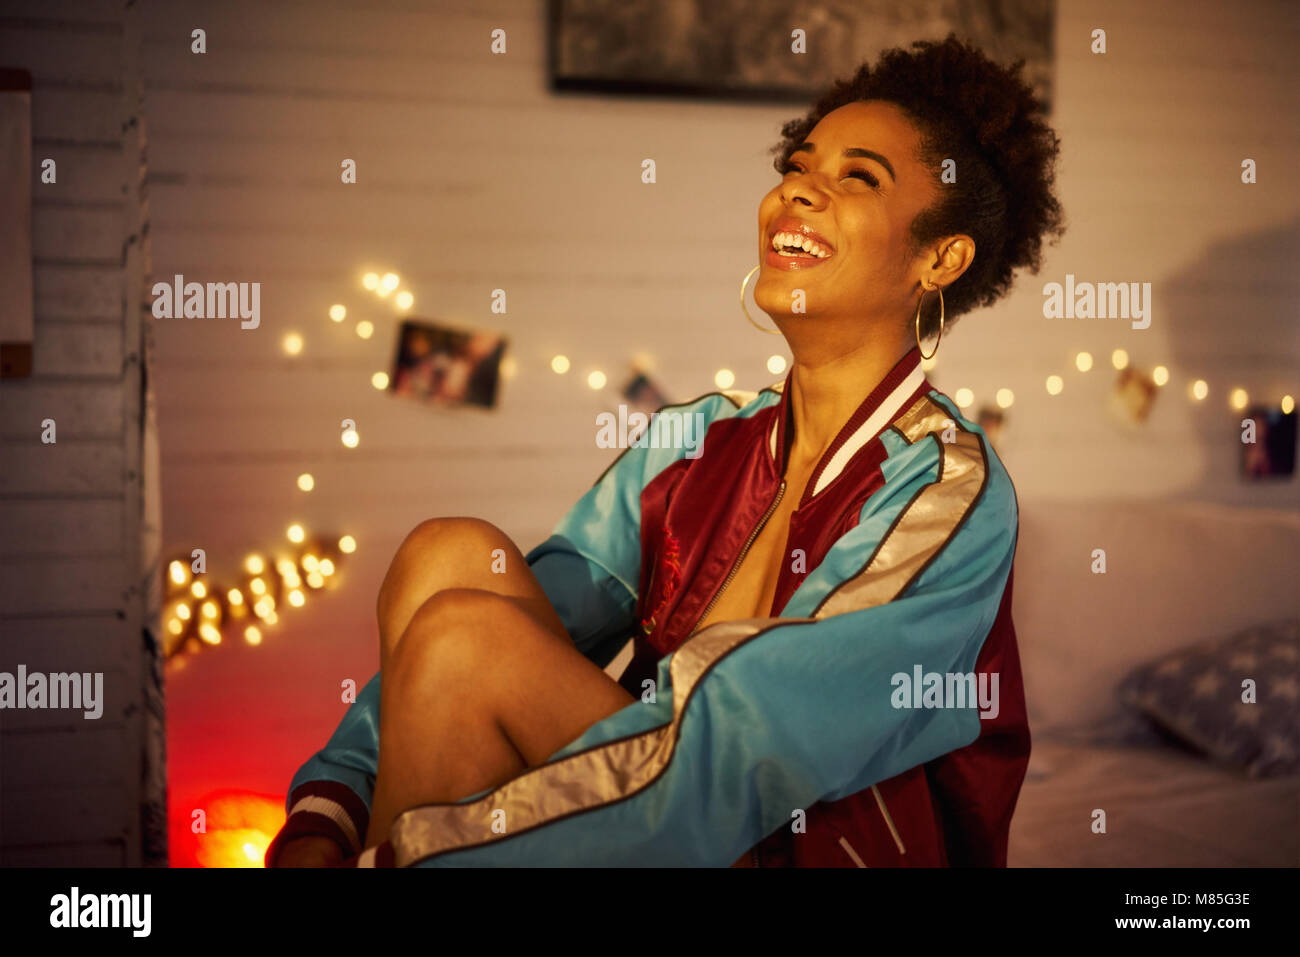 Young Cheerful Black Woman Smiling at Night Banque D'Images